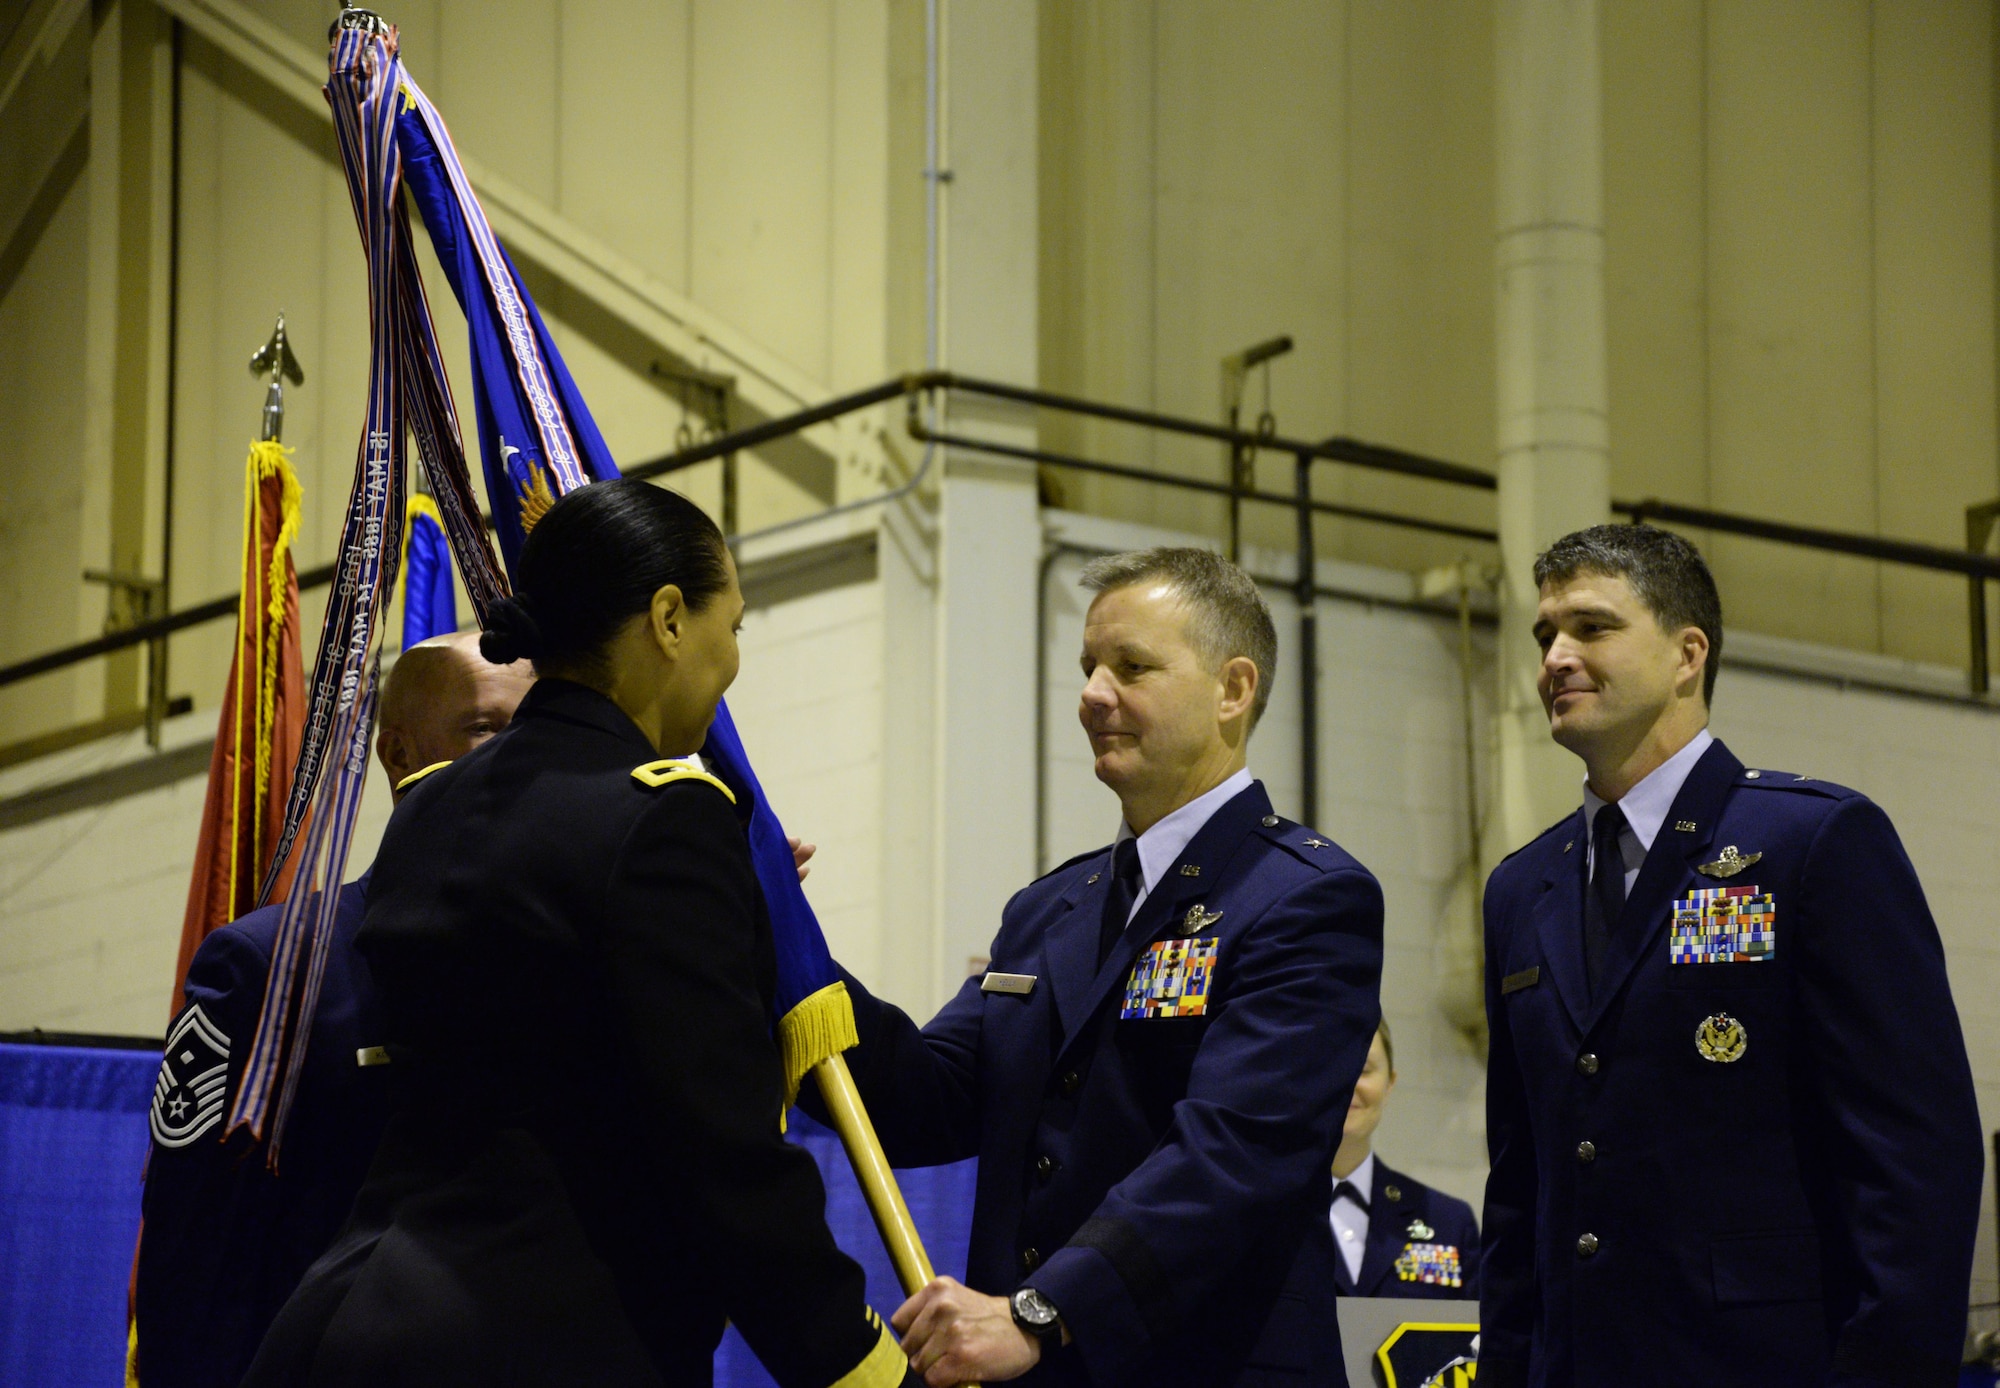 U.S. Air Force Brig. Gen. Scott Kelly, Assistant Adjutant General – Air, passes the 175th Wing guidon to U.S. Army Maj. Gen. Linda Singh, Maryland National Guard Adjutant General, at Warfield Air National Guard Base, Baltimore, Md., during a change of command ceremony December 6, 2015. During the ceremony Brig. Gen. Randolph Staudenraus assumed command of the 175th Wing from Kelly. (U.S. Air National Guard photo by Airman 1st Class Enjoli Saunders/RELEASED)